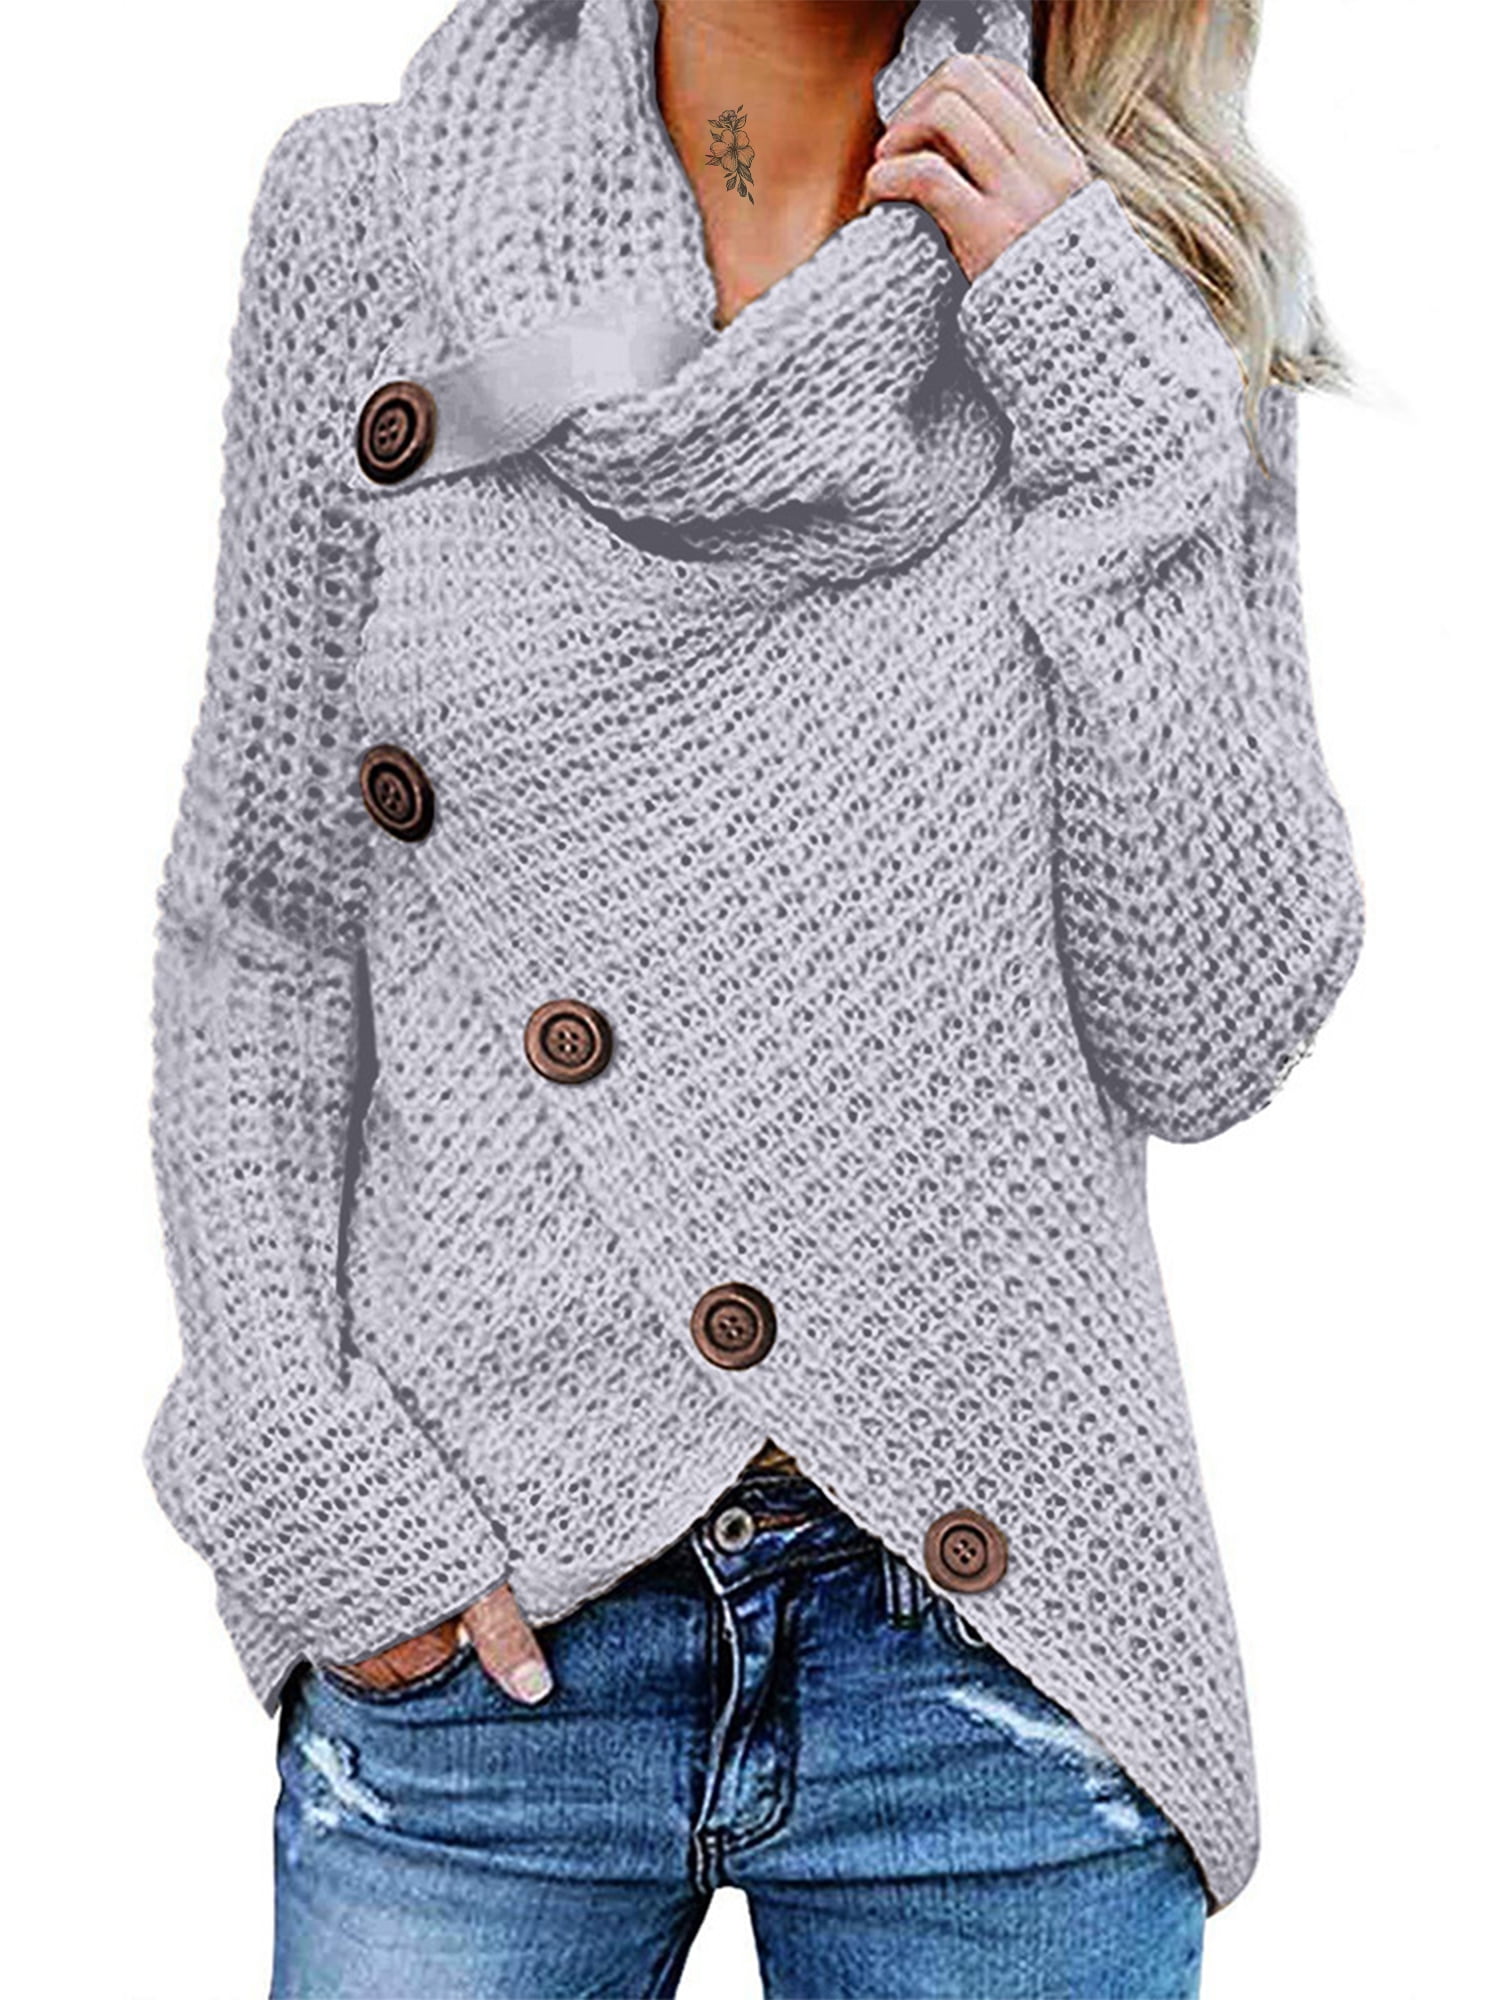 Womens Ladies Long Sleeve Knitted Baggy Sweater Jumper Oversized Pullover Tops